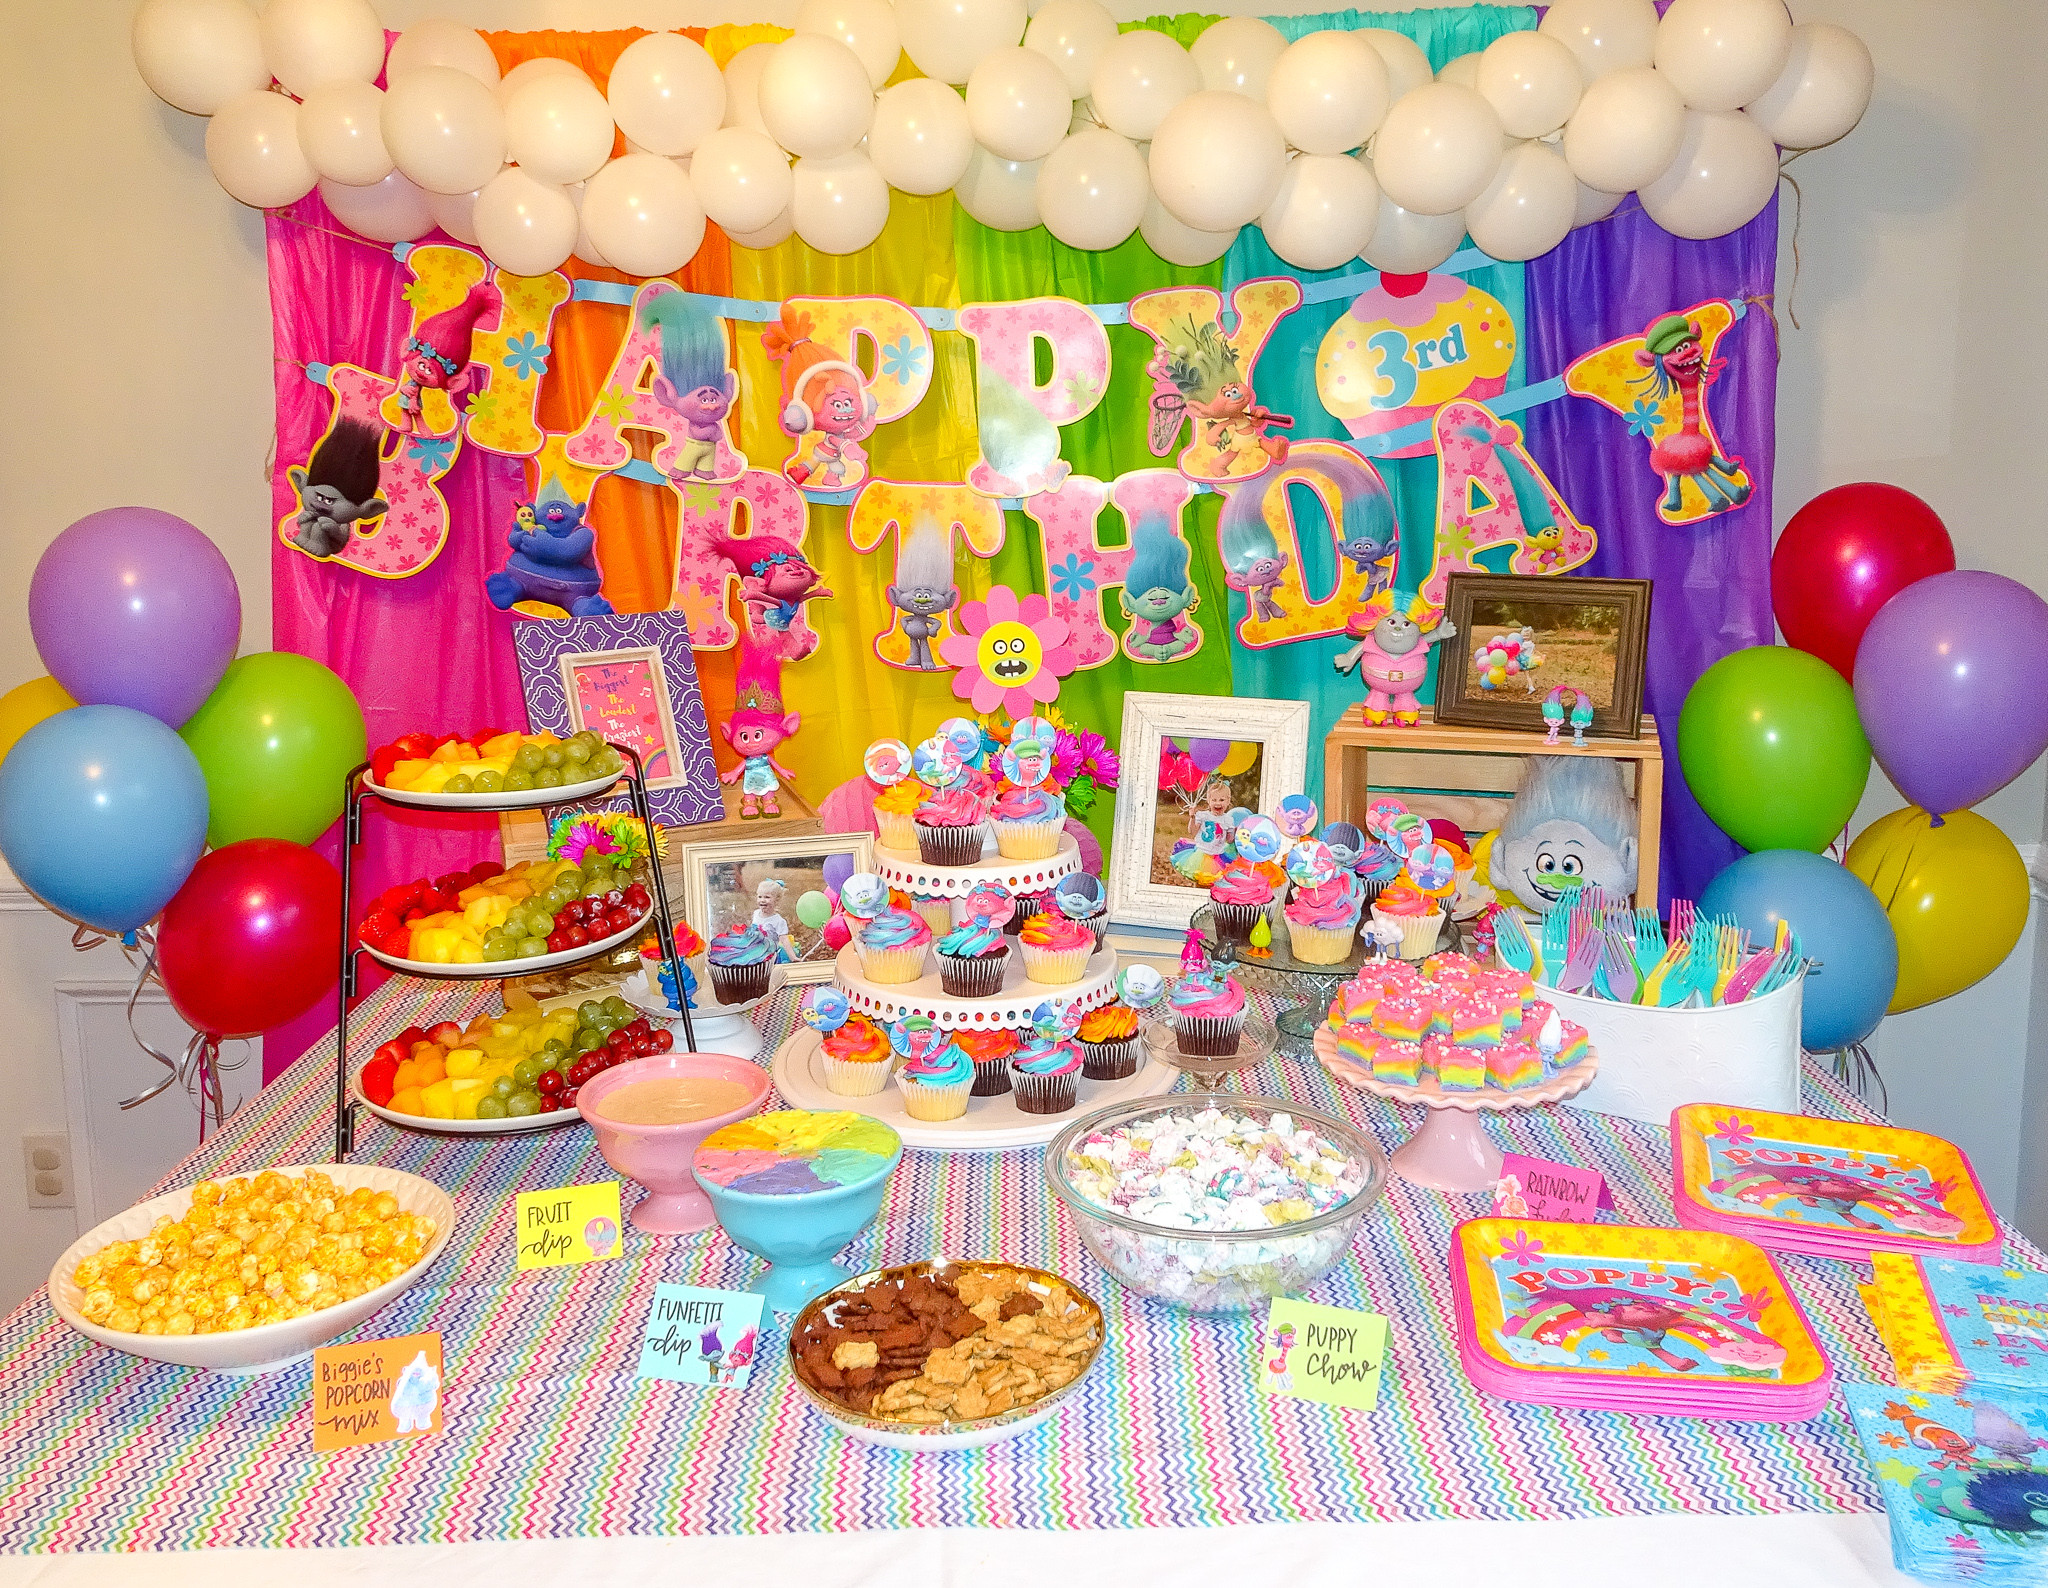 Trolls Birthday Party Ideas For Food
 Audrey s Trolls Birthday Party Poppy Grace